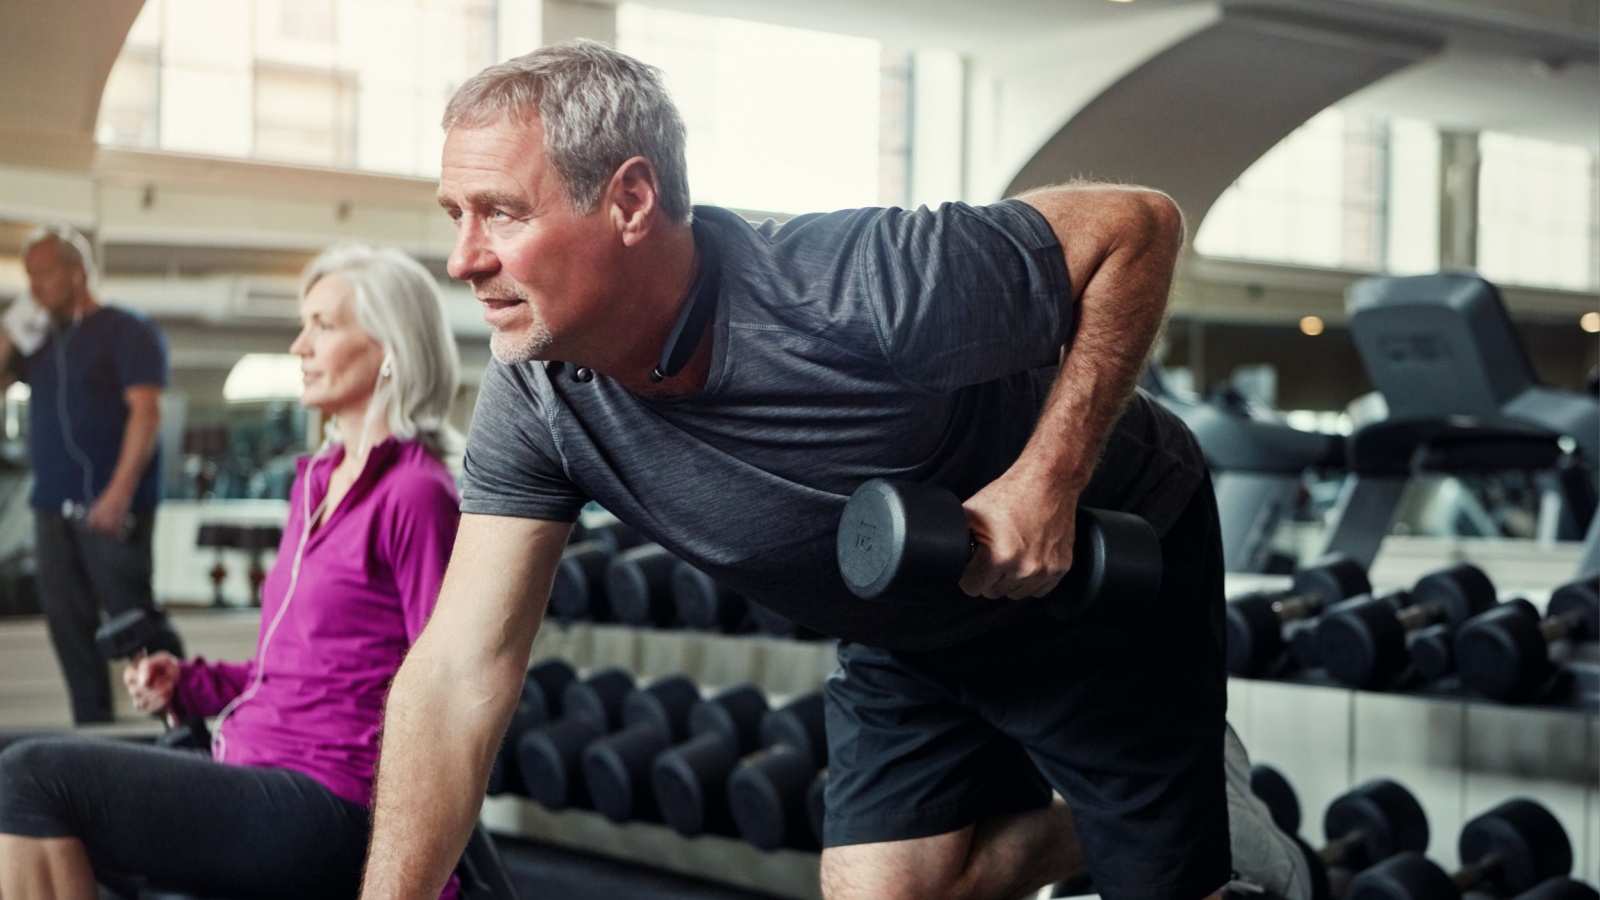 Exercise for Seniors: Physical Therapists and Fitness Trainers Share Their Best Tips [Video]